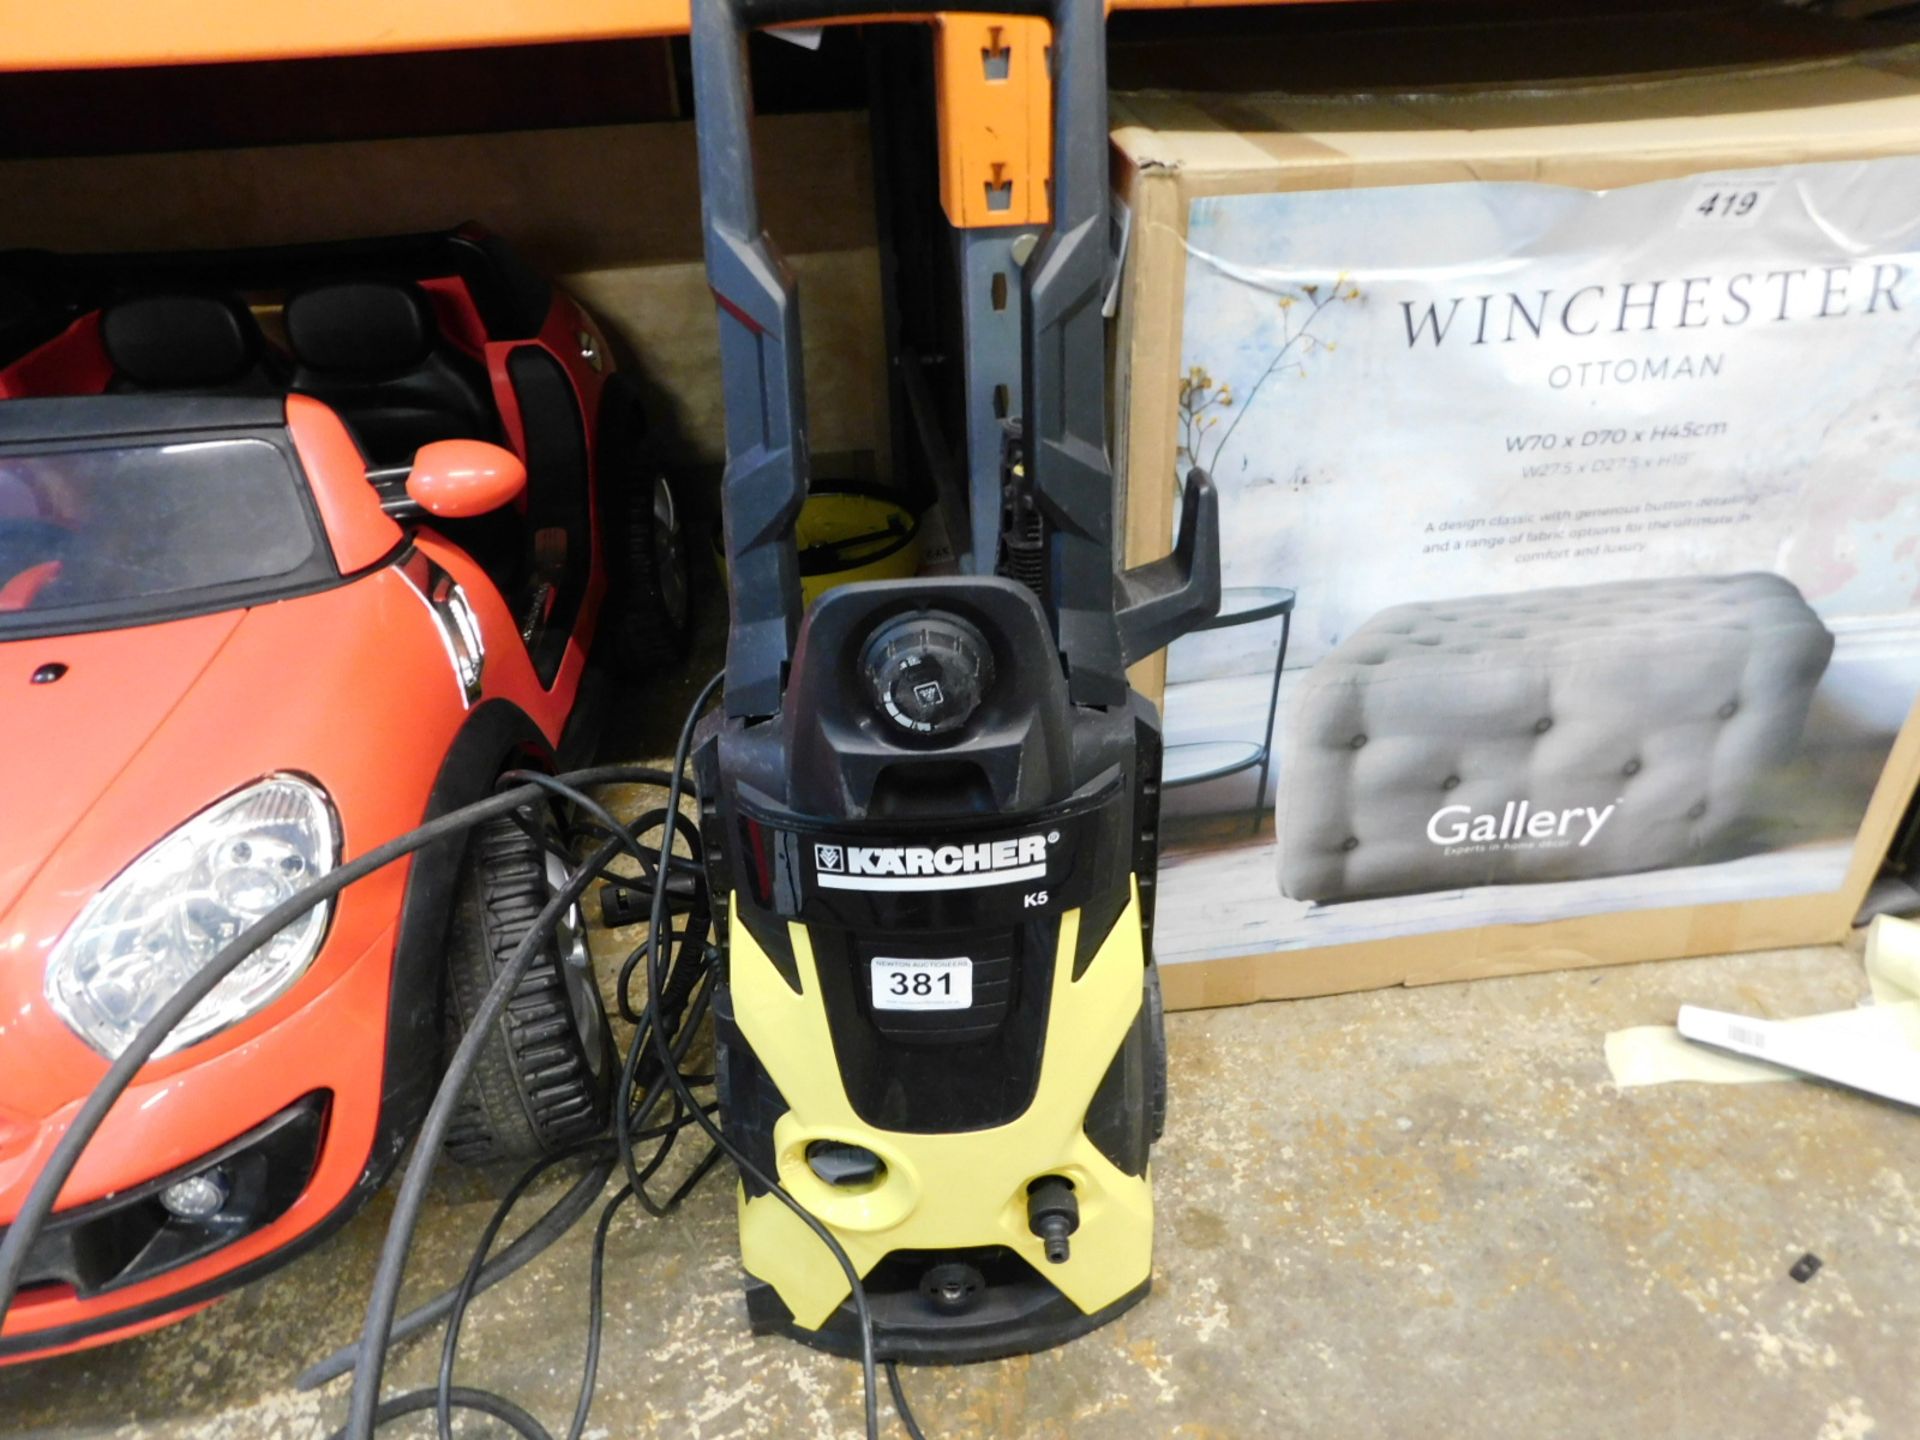 1 KARCHER K5 HIGH PRESSURE WASHER WITH ACCESSORIES RRP £459